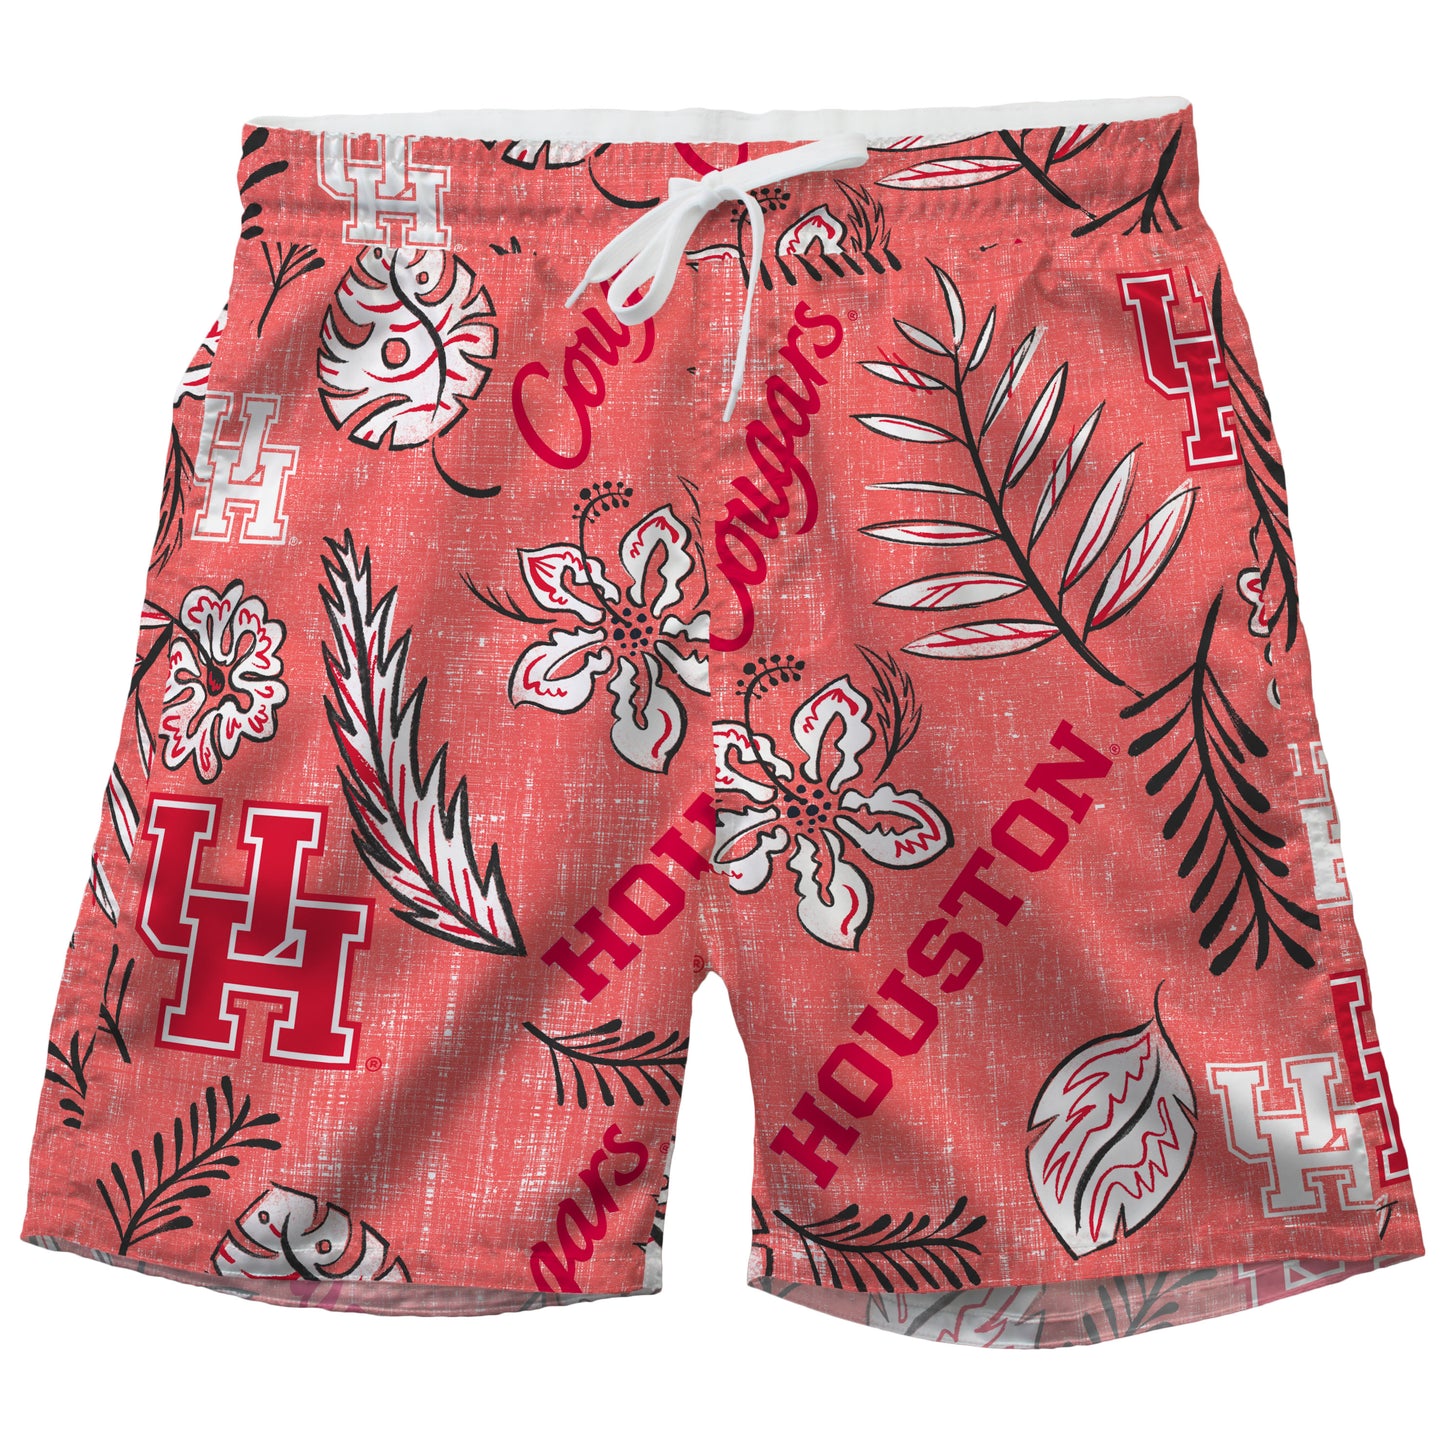 Wes & Willy Houston Cougars Men's Vintage Floral Swim Trunk